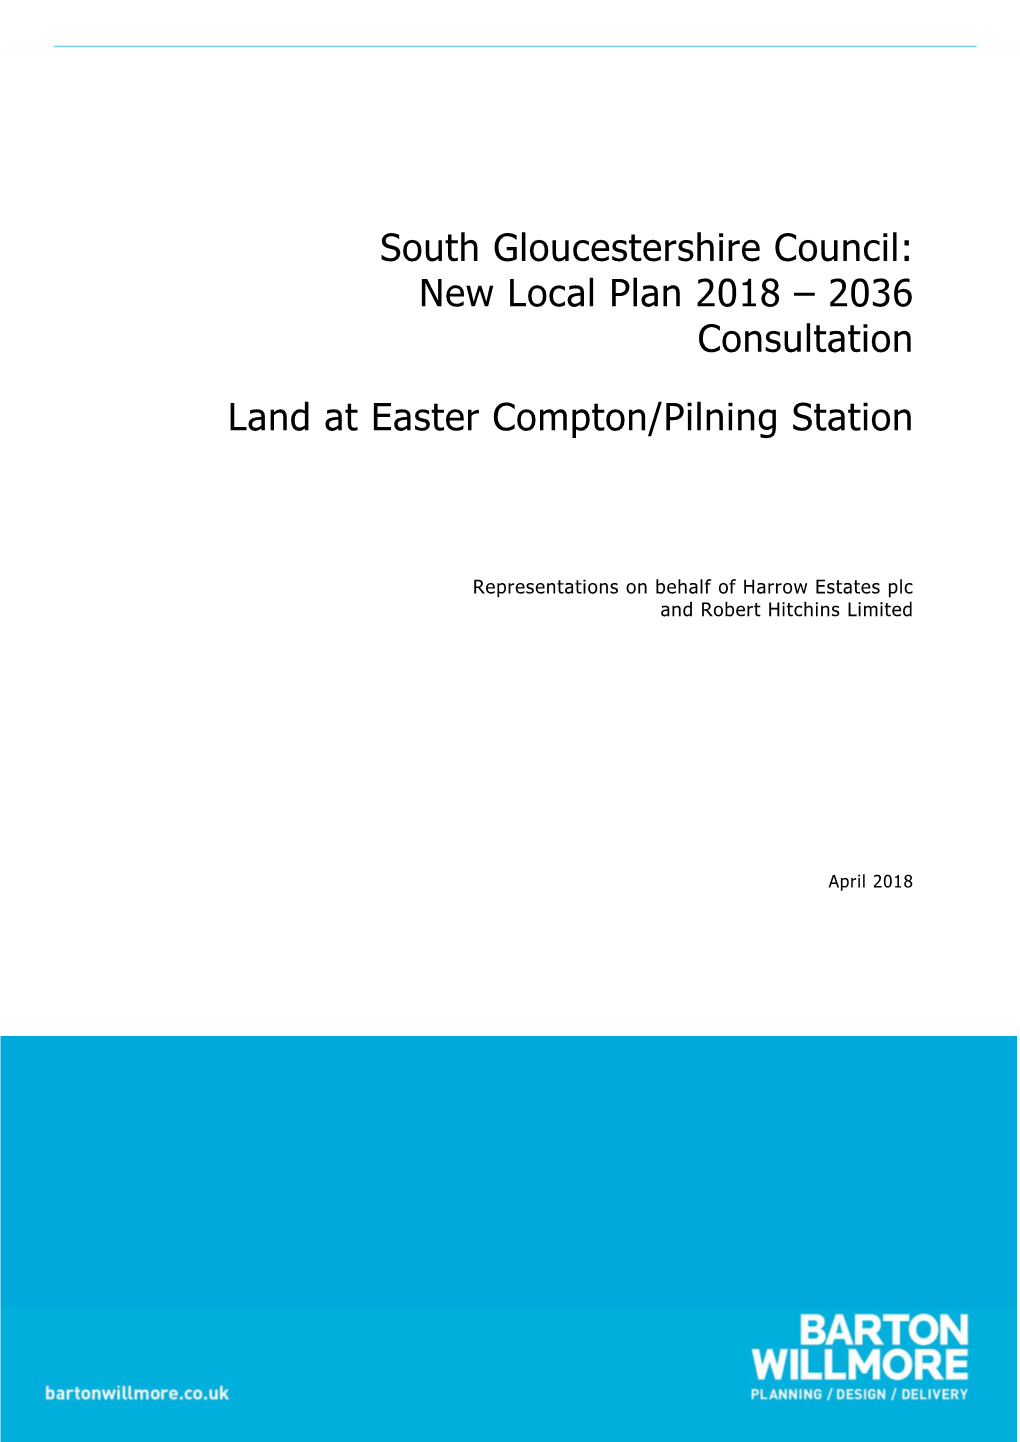 2036 Consultation Land at Easter Compton/Pilning Station